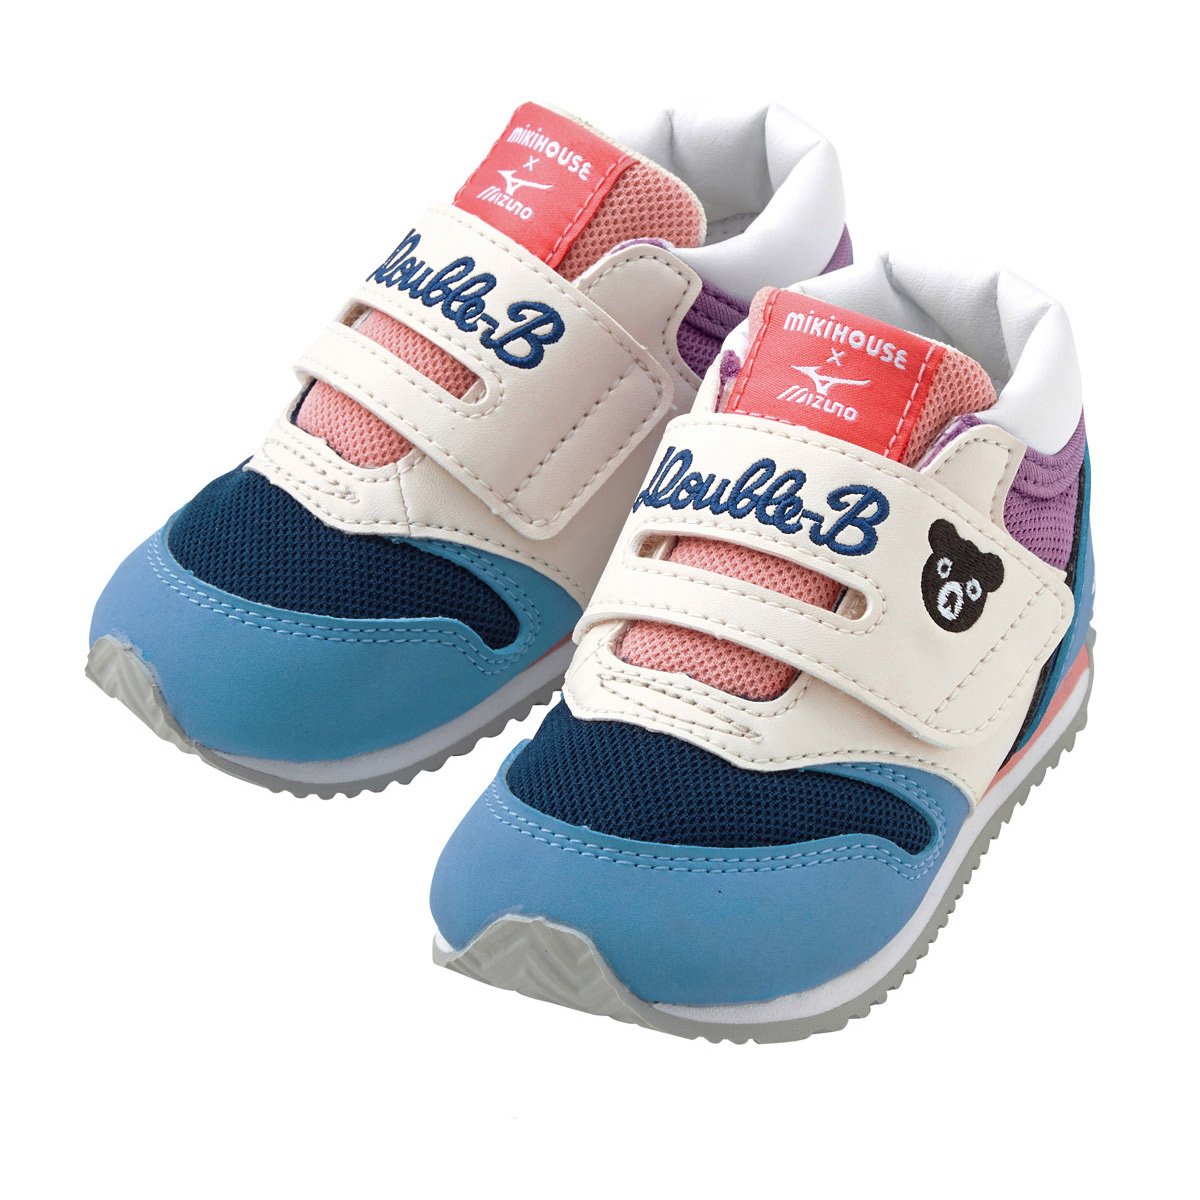 DOUBLE_B BABY SHOES